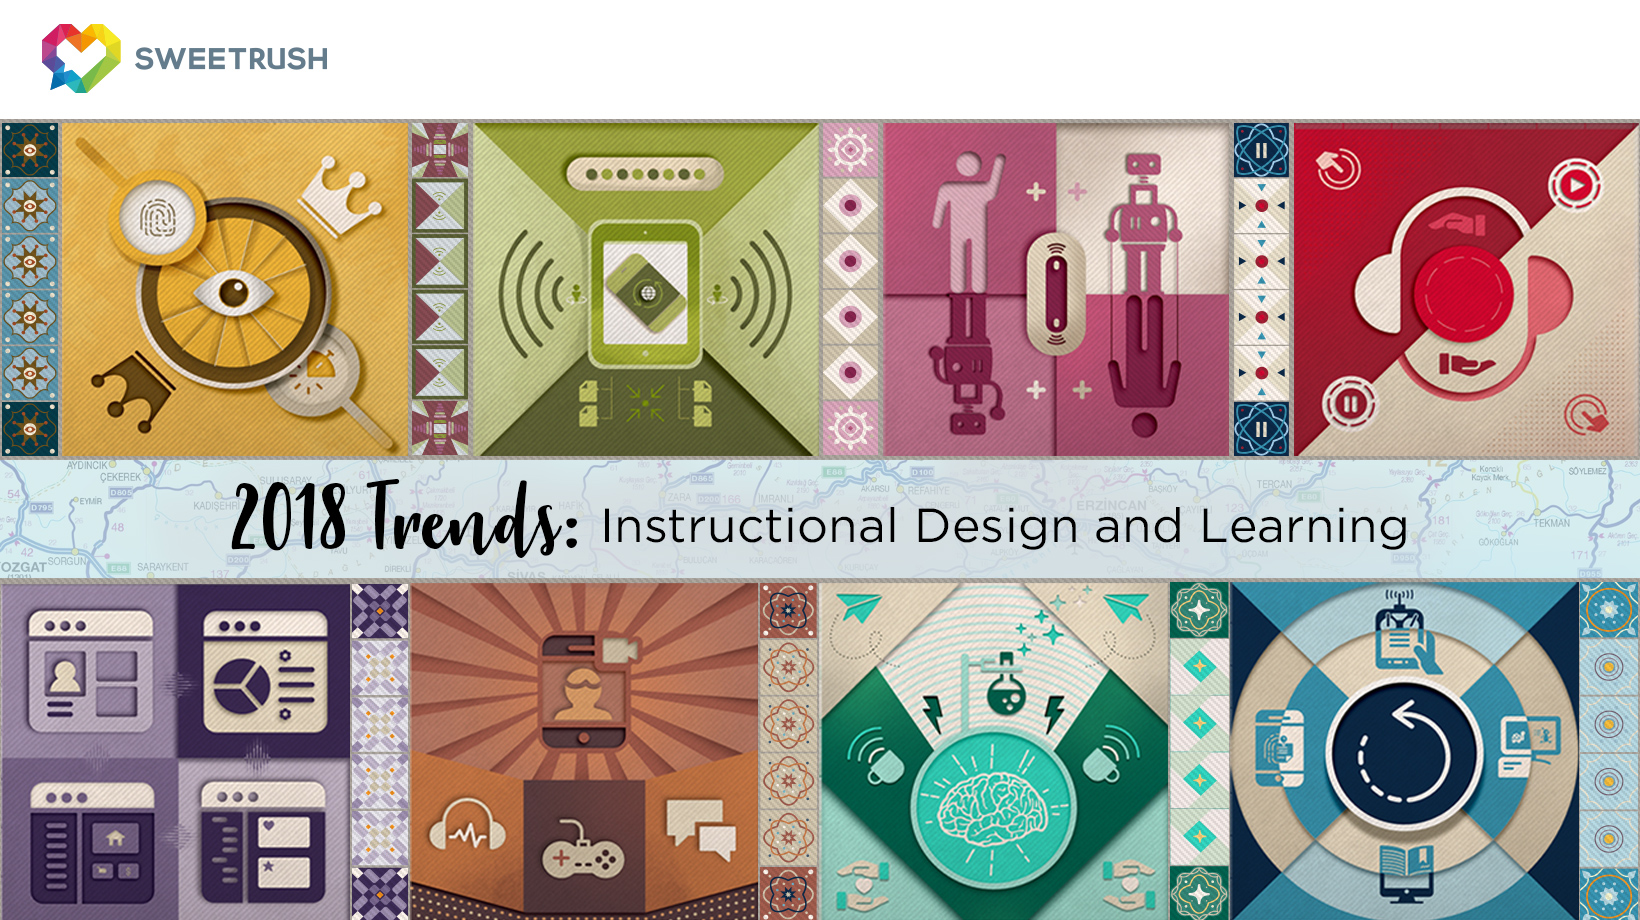 instructional design and learning trends